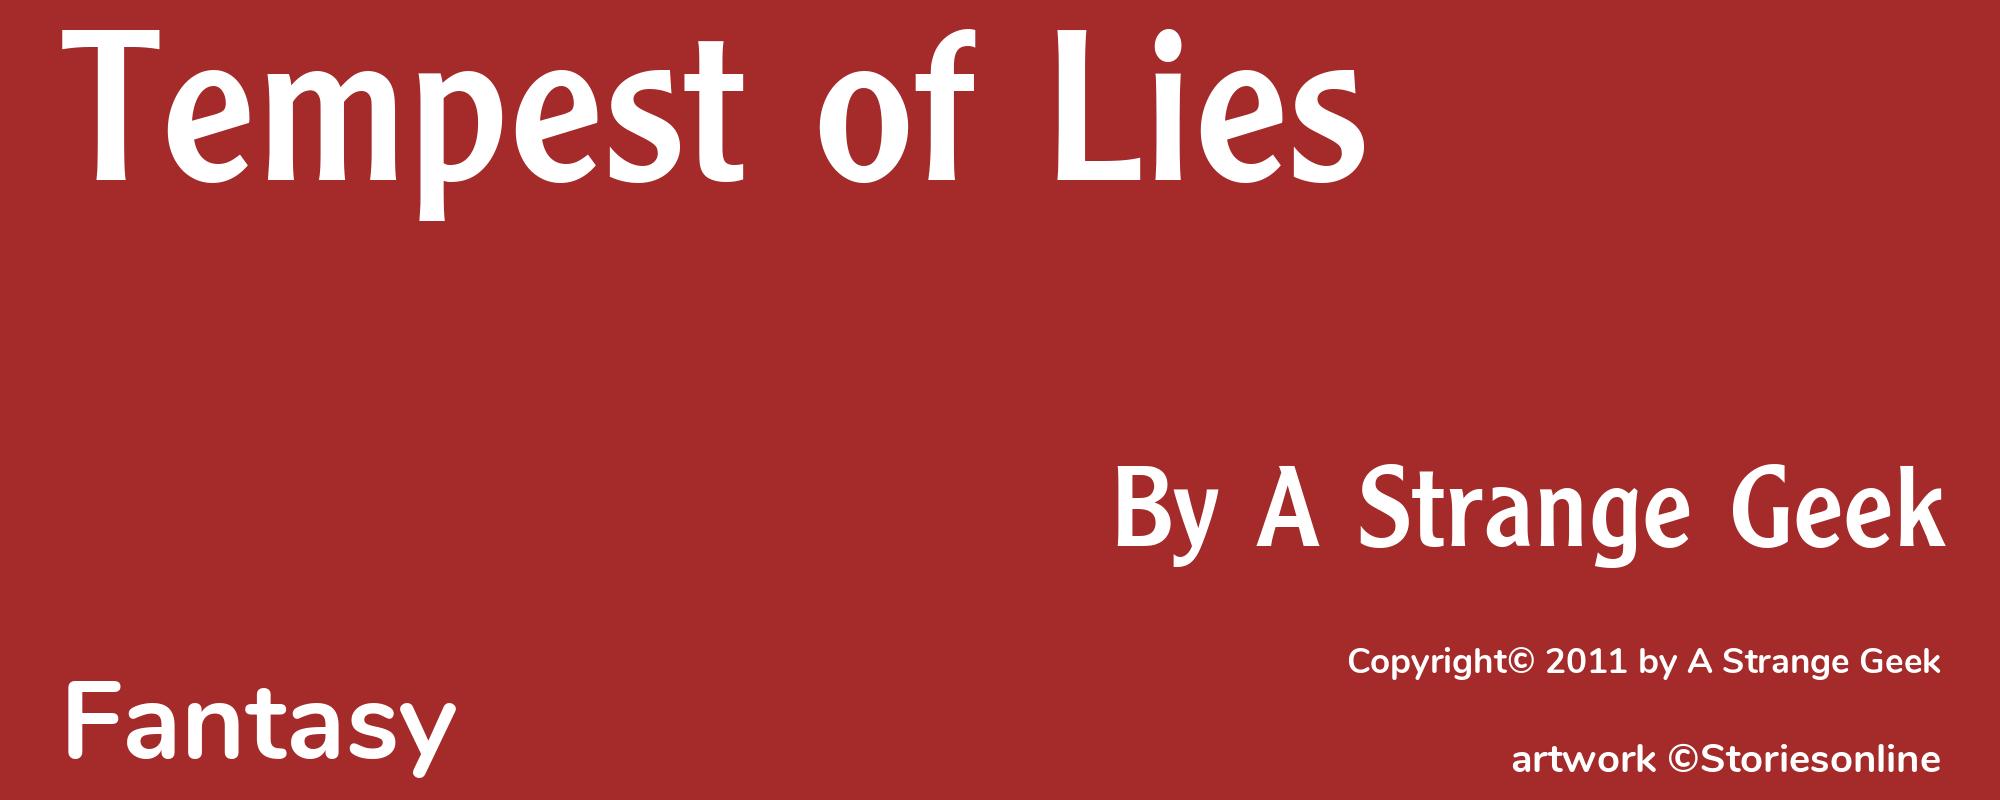 Tempest of Lies - Cover